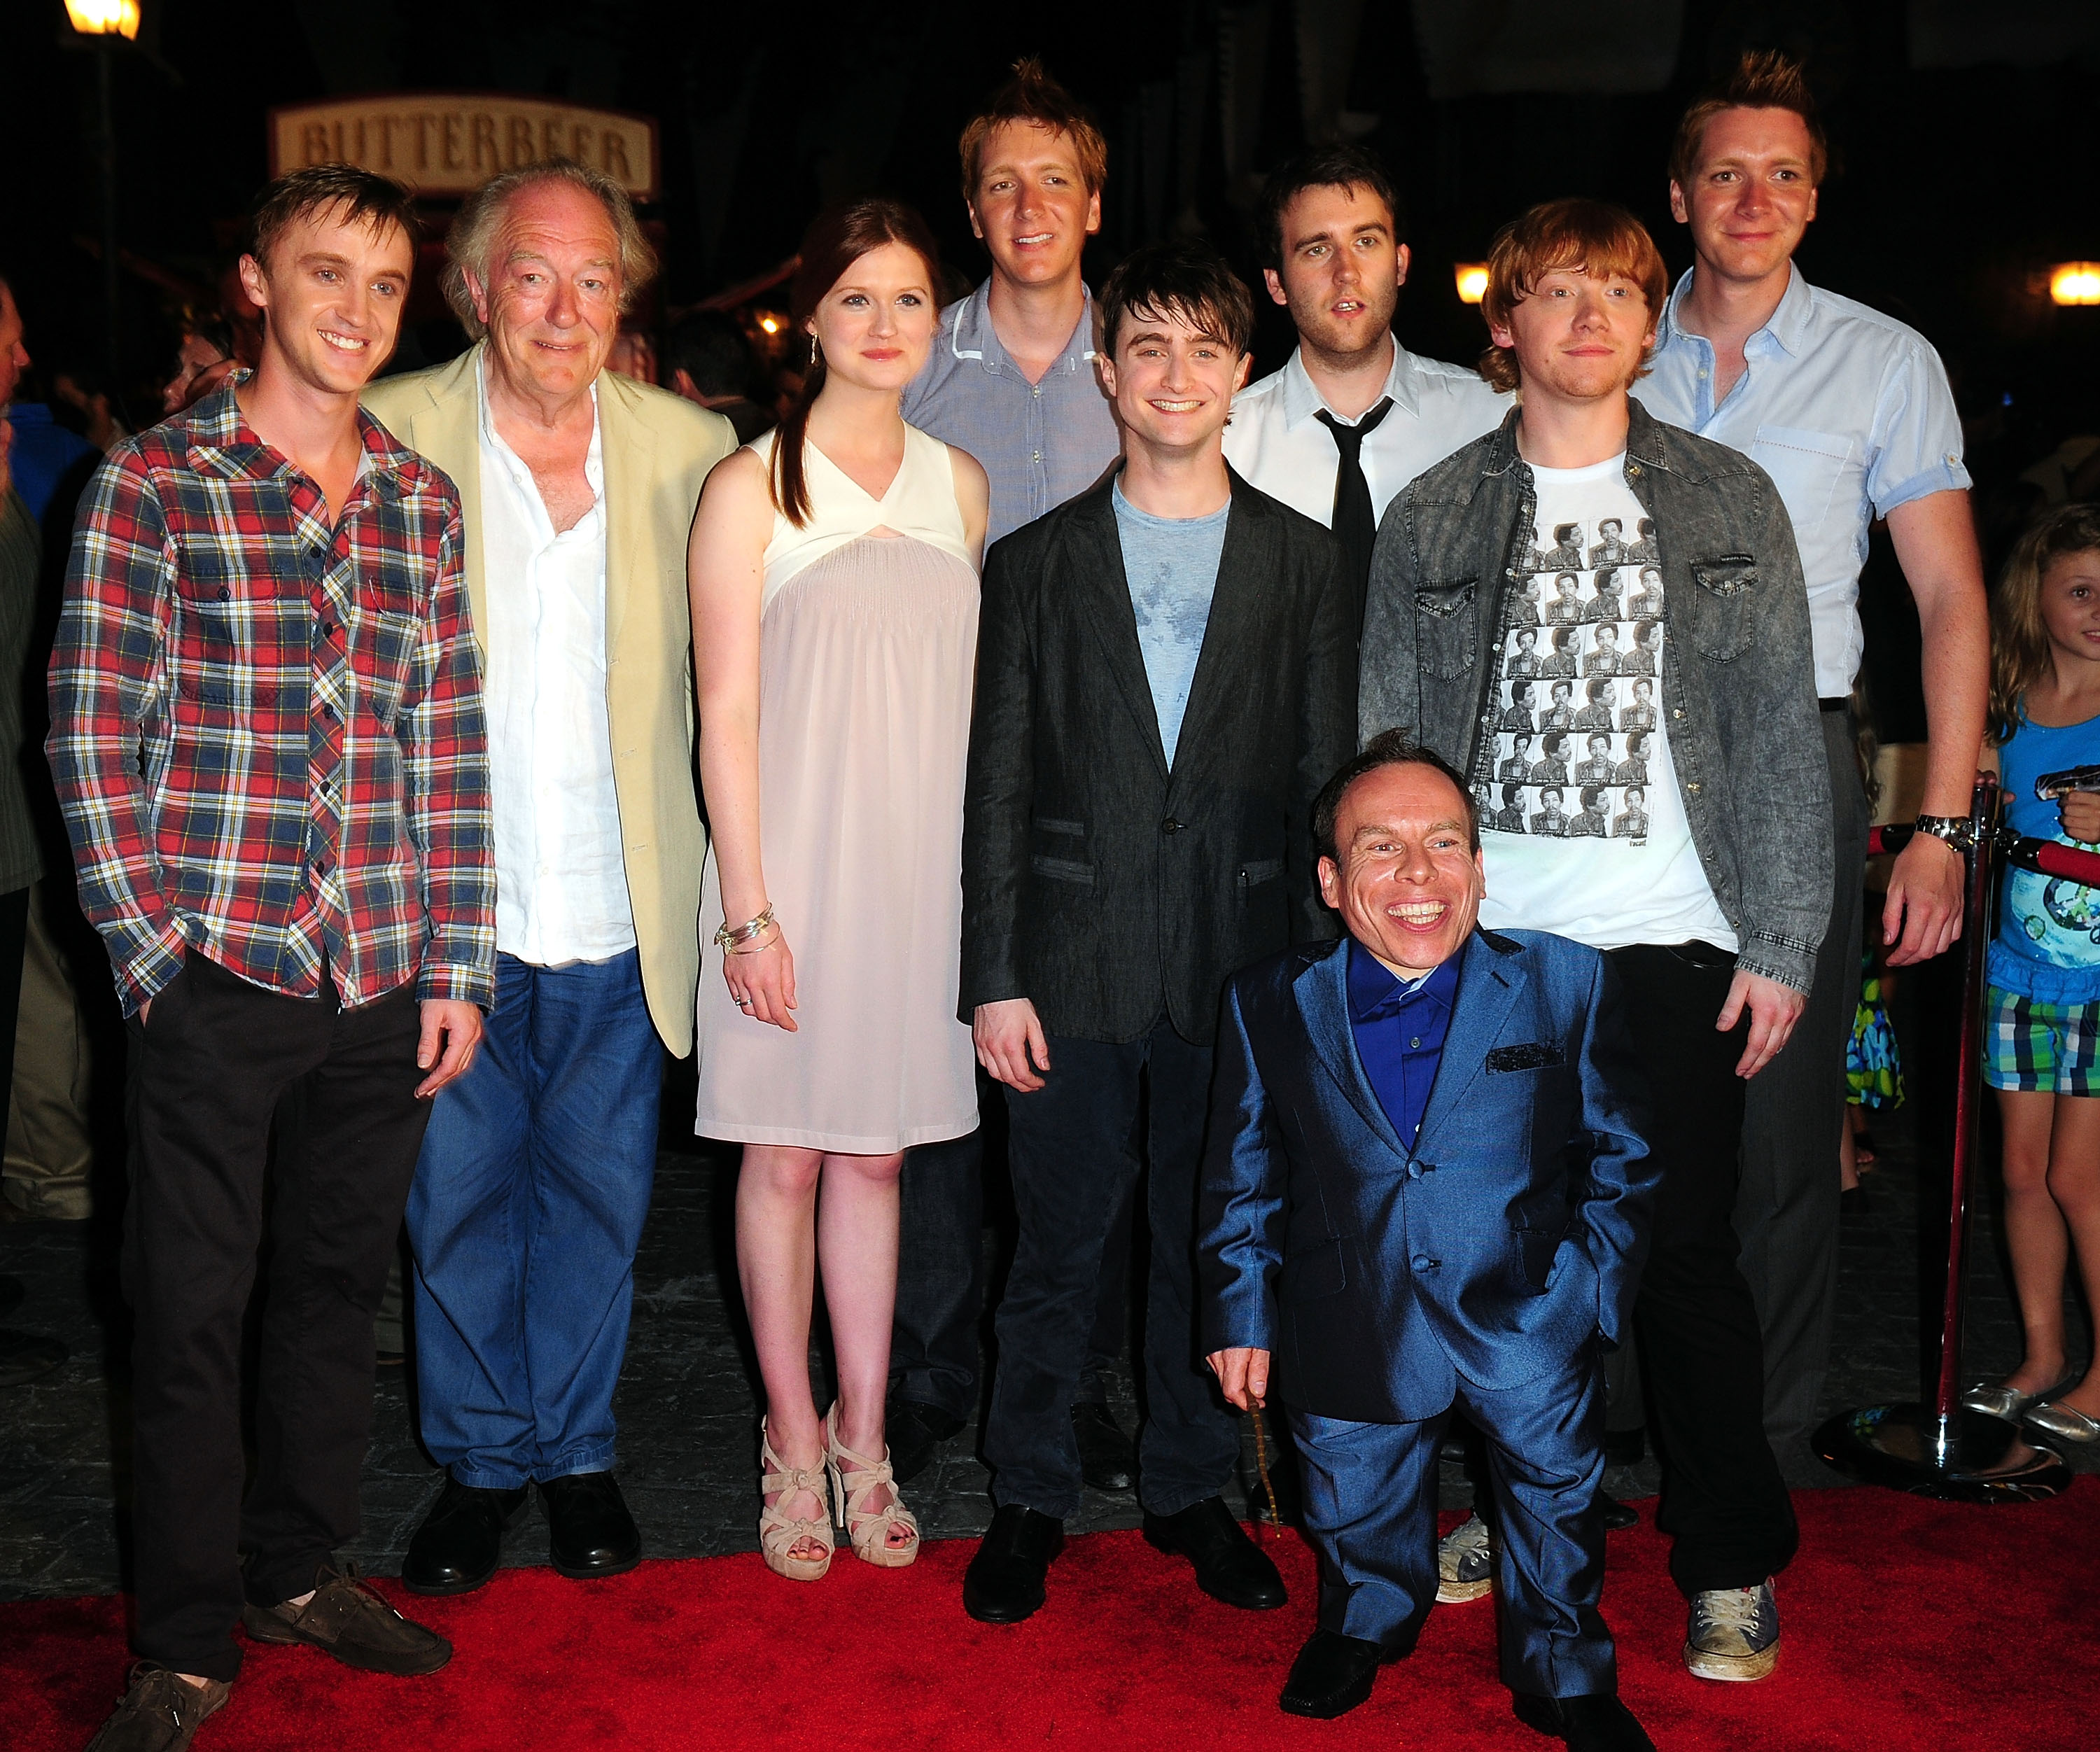 Sir Michael Gambon with some of the cast from the "Harry Potter" franchise at a grand opening in Orlando, Florida on June 16, 2010 | Source: Getty Images